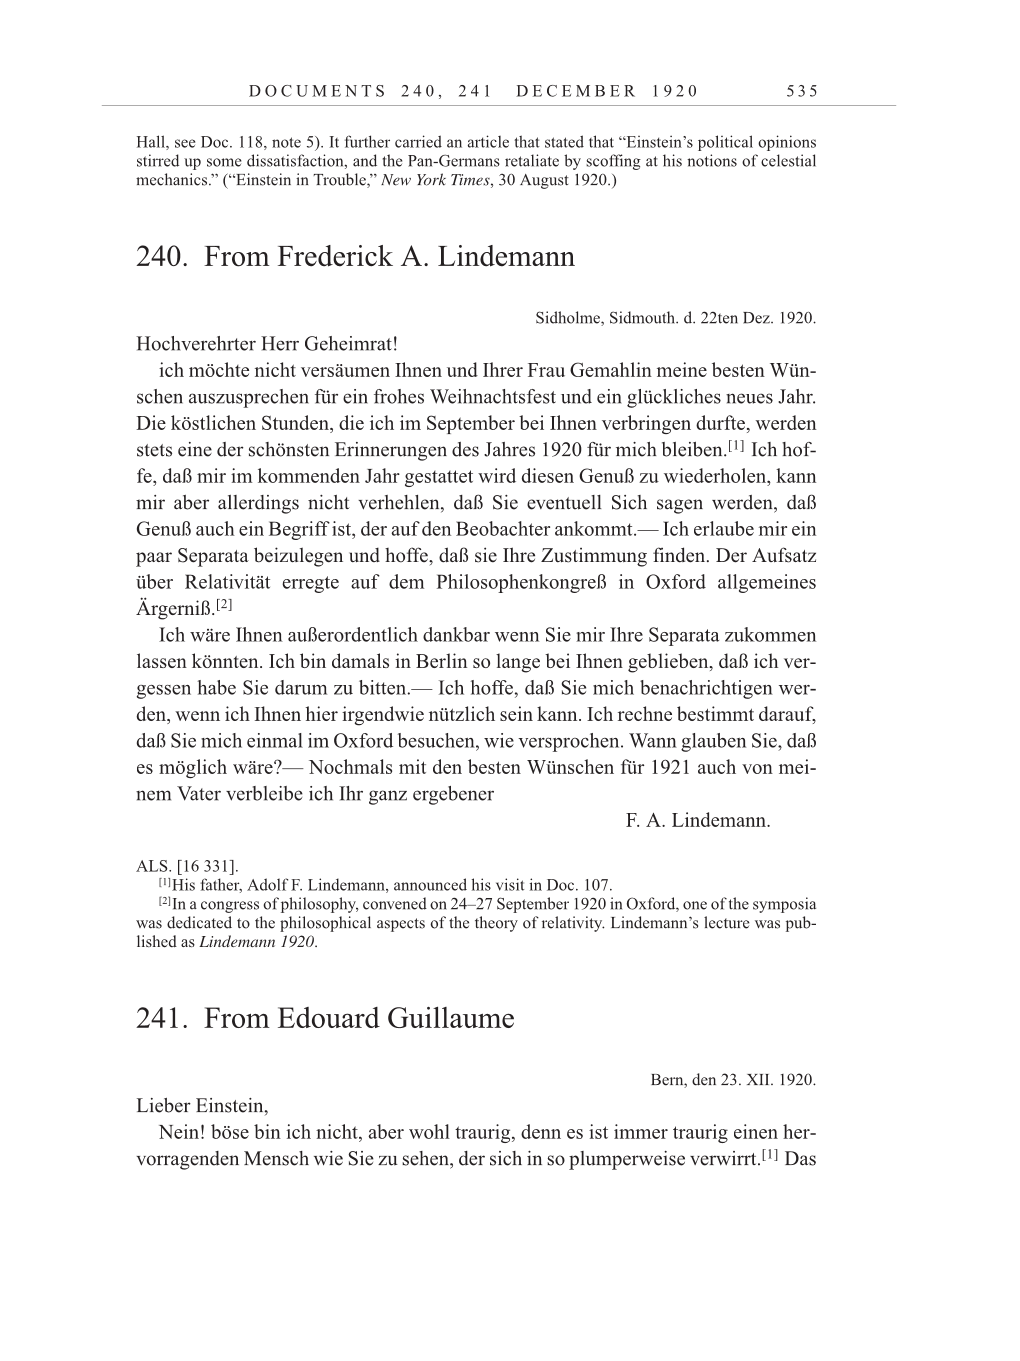 Volume 10: The Berlin Years: Correspondence May-December 1920 / Supplementary Correspondence 1909-1920 page 535